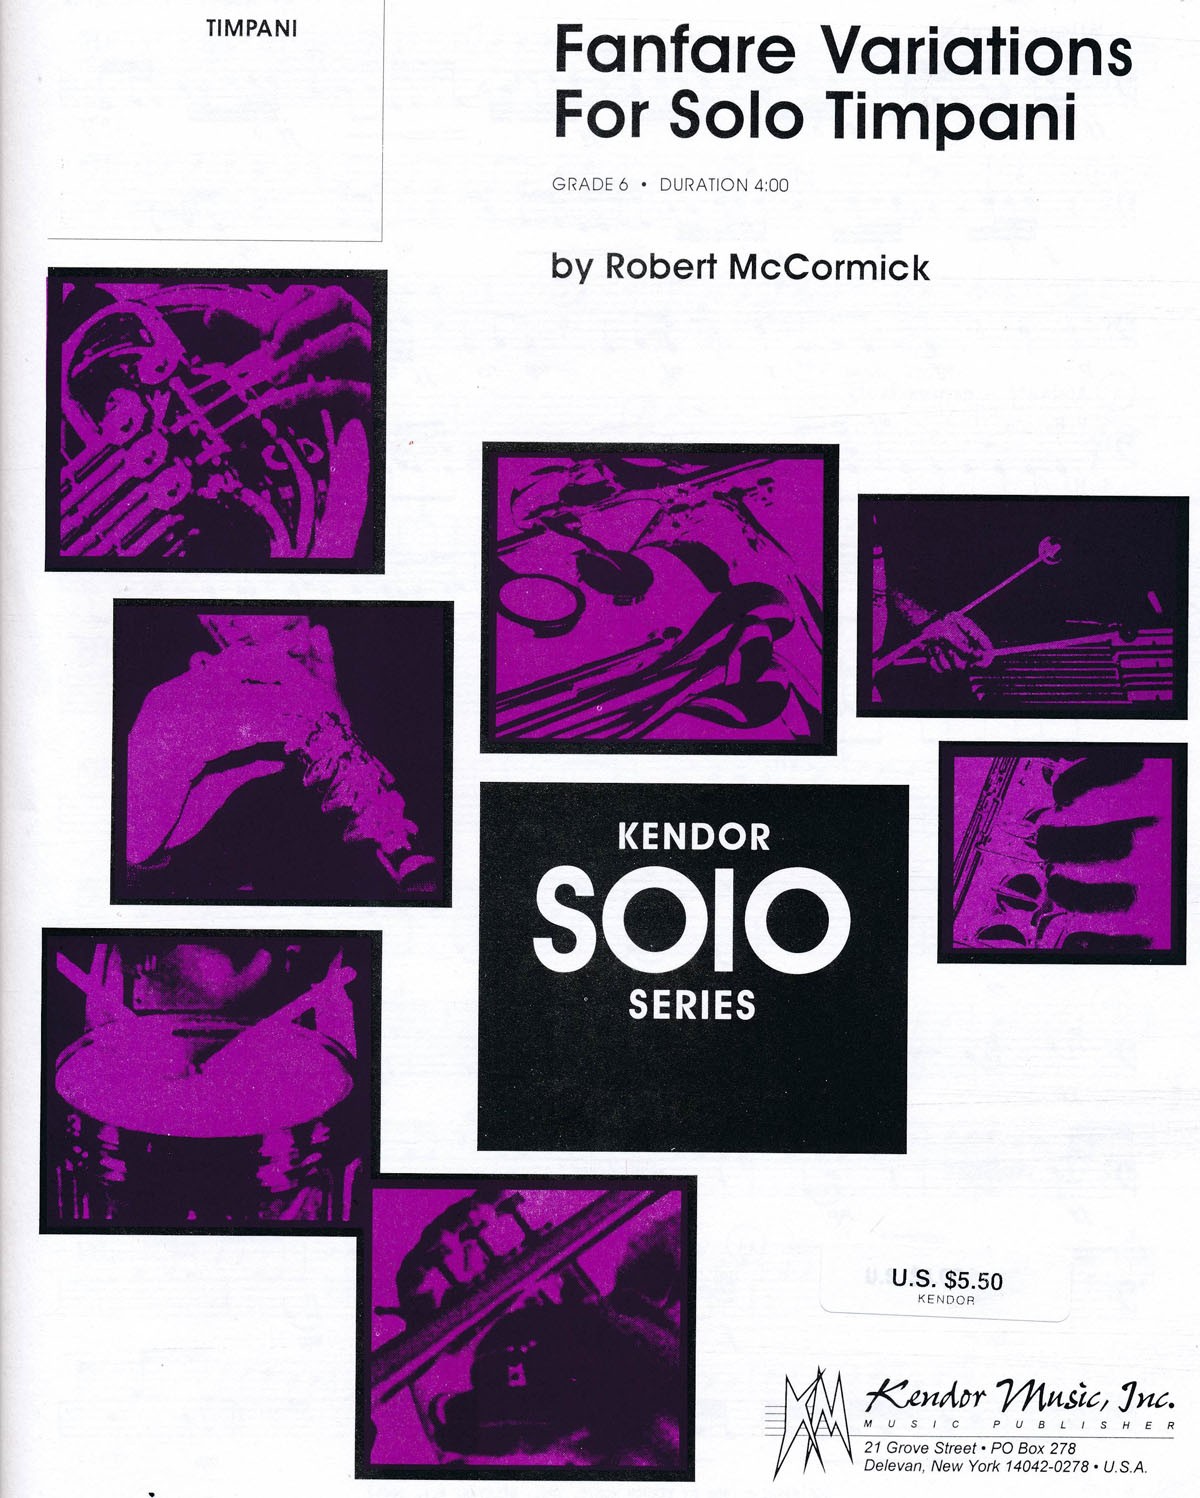 Fanfare Variations For Solo Timpani by Robert McCormick